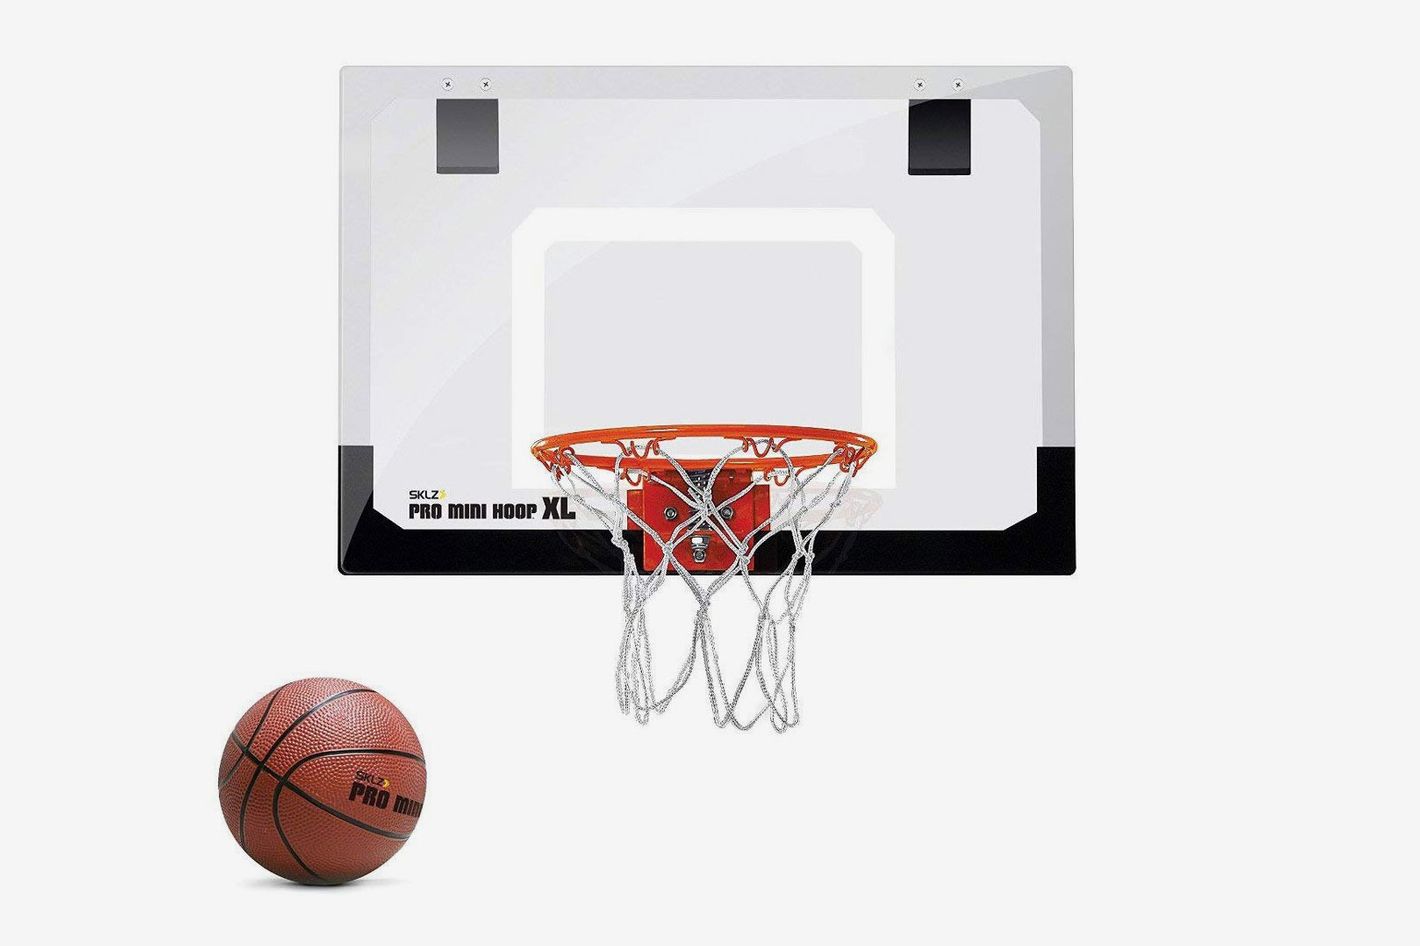 QYLLXSYY Basketball Hoop Basketball Net Heavy Duty Indoor and Outdoor All Weather Anti Whip Thick Net Hoop Goal Rim Indoor Outdoor Basketball Hoop